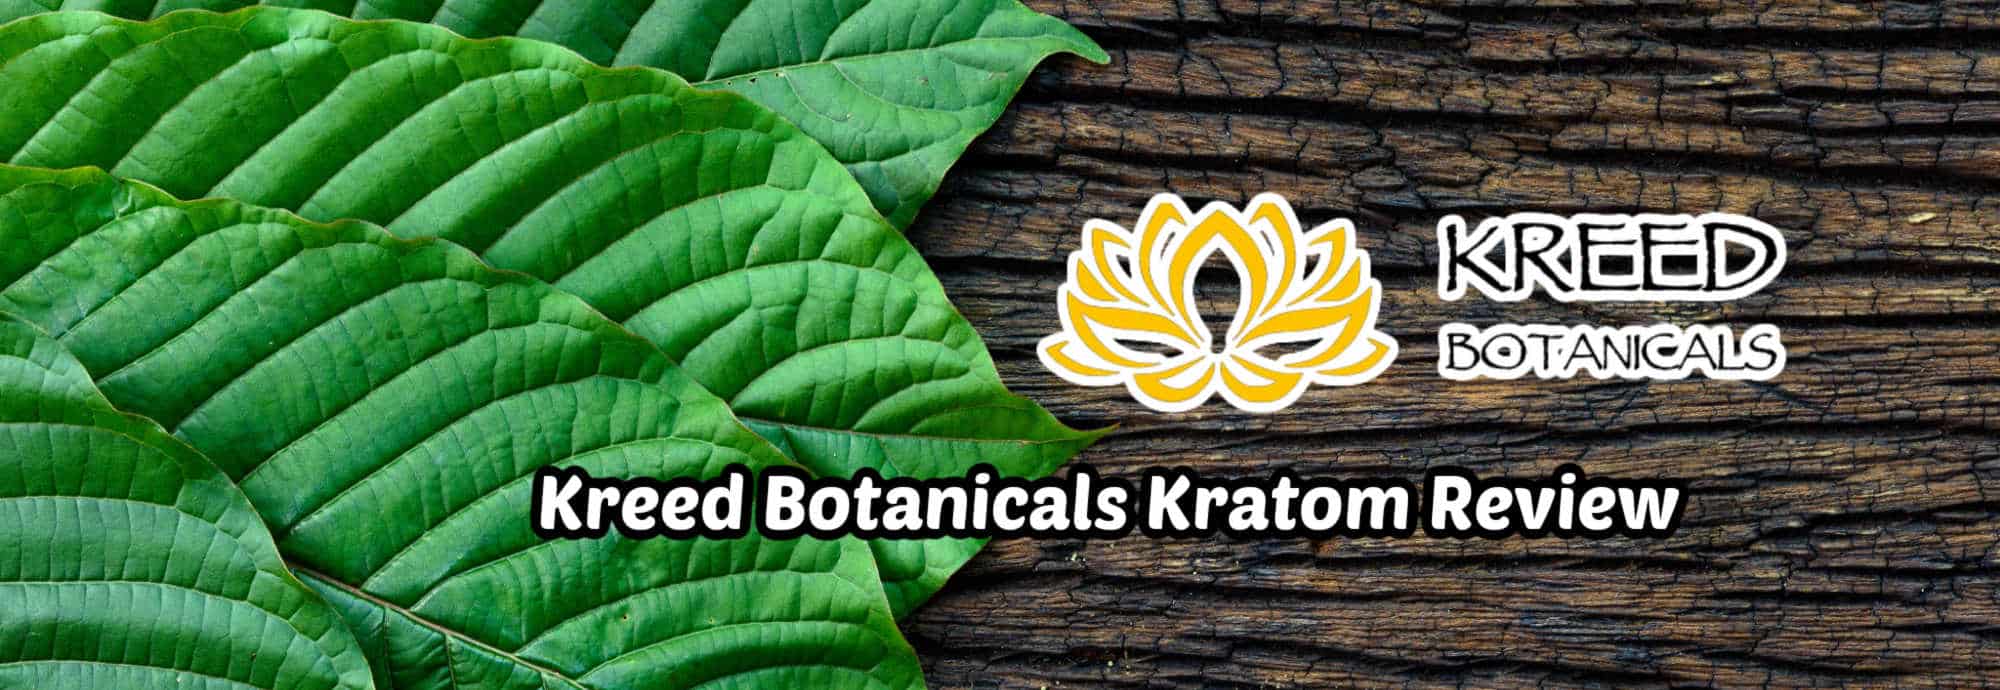 Kreed Botanicals : What You Should Know About This Bay Area Kratom Brand